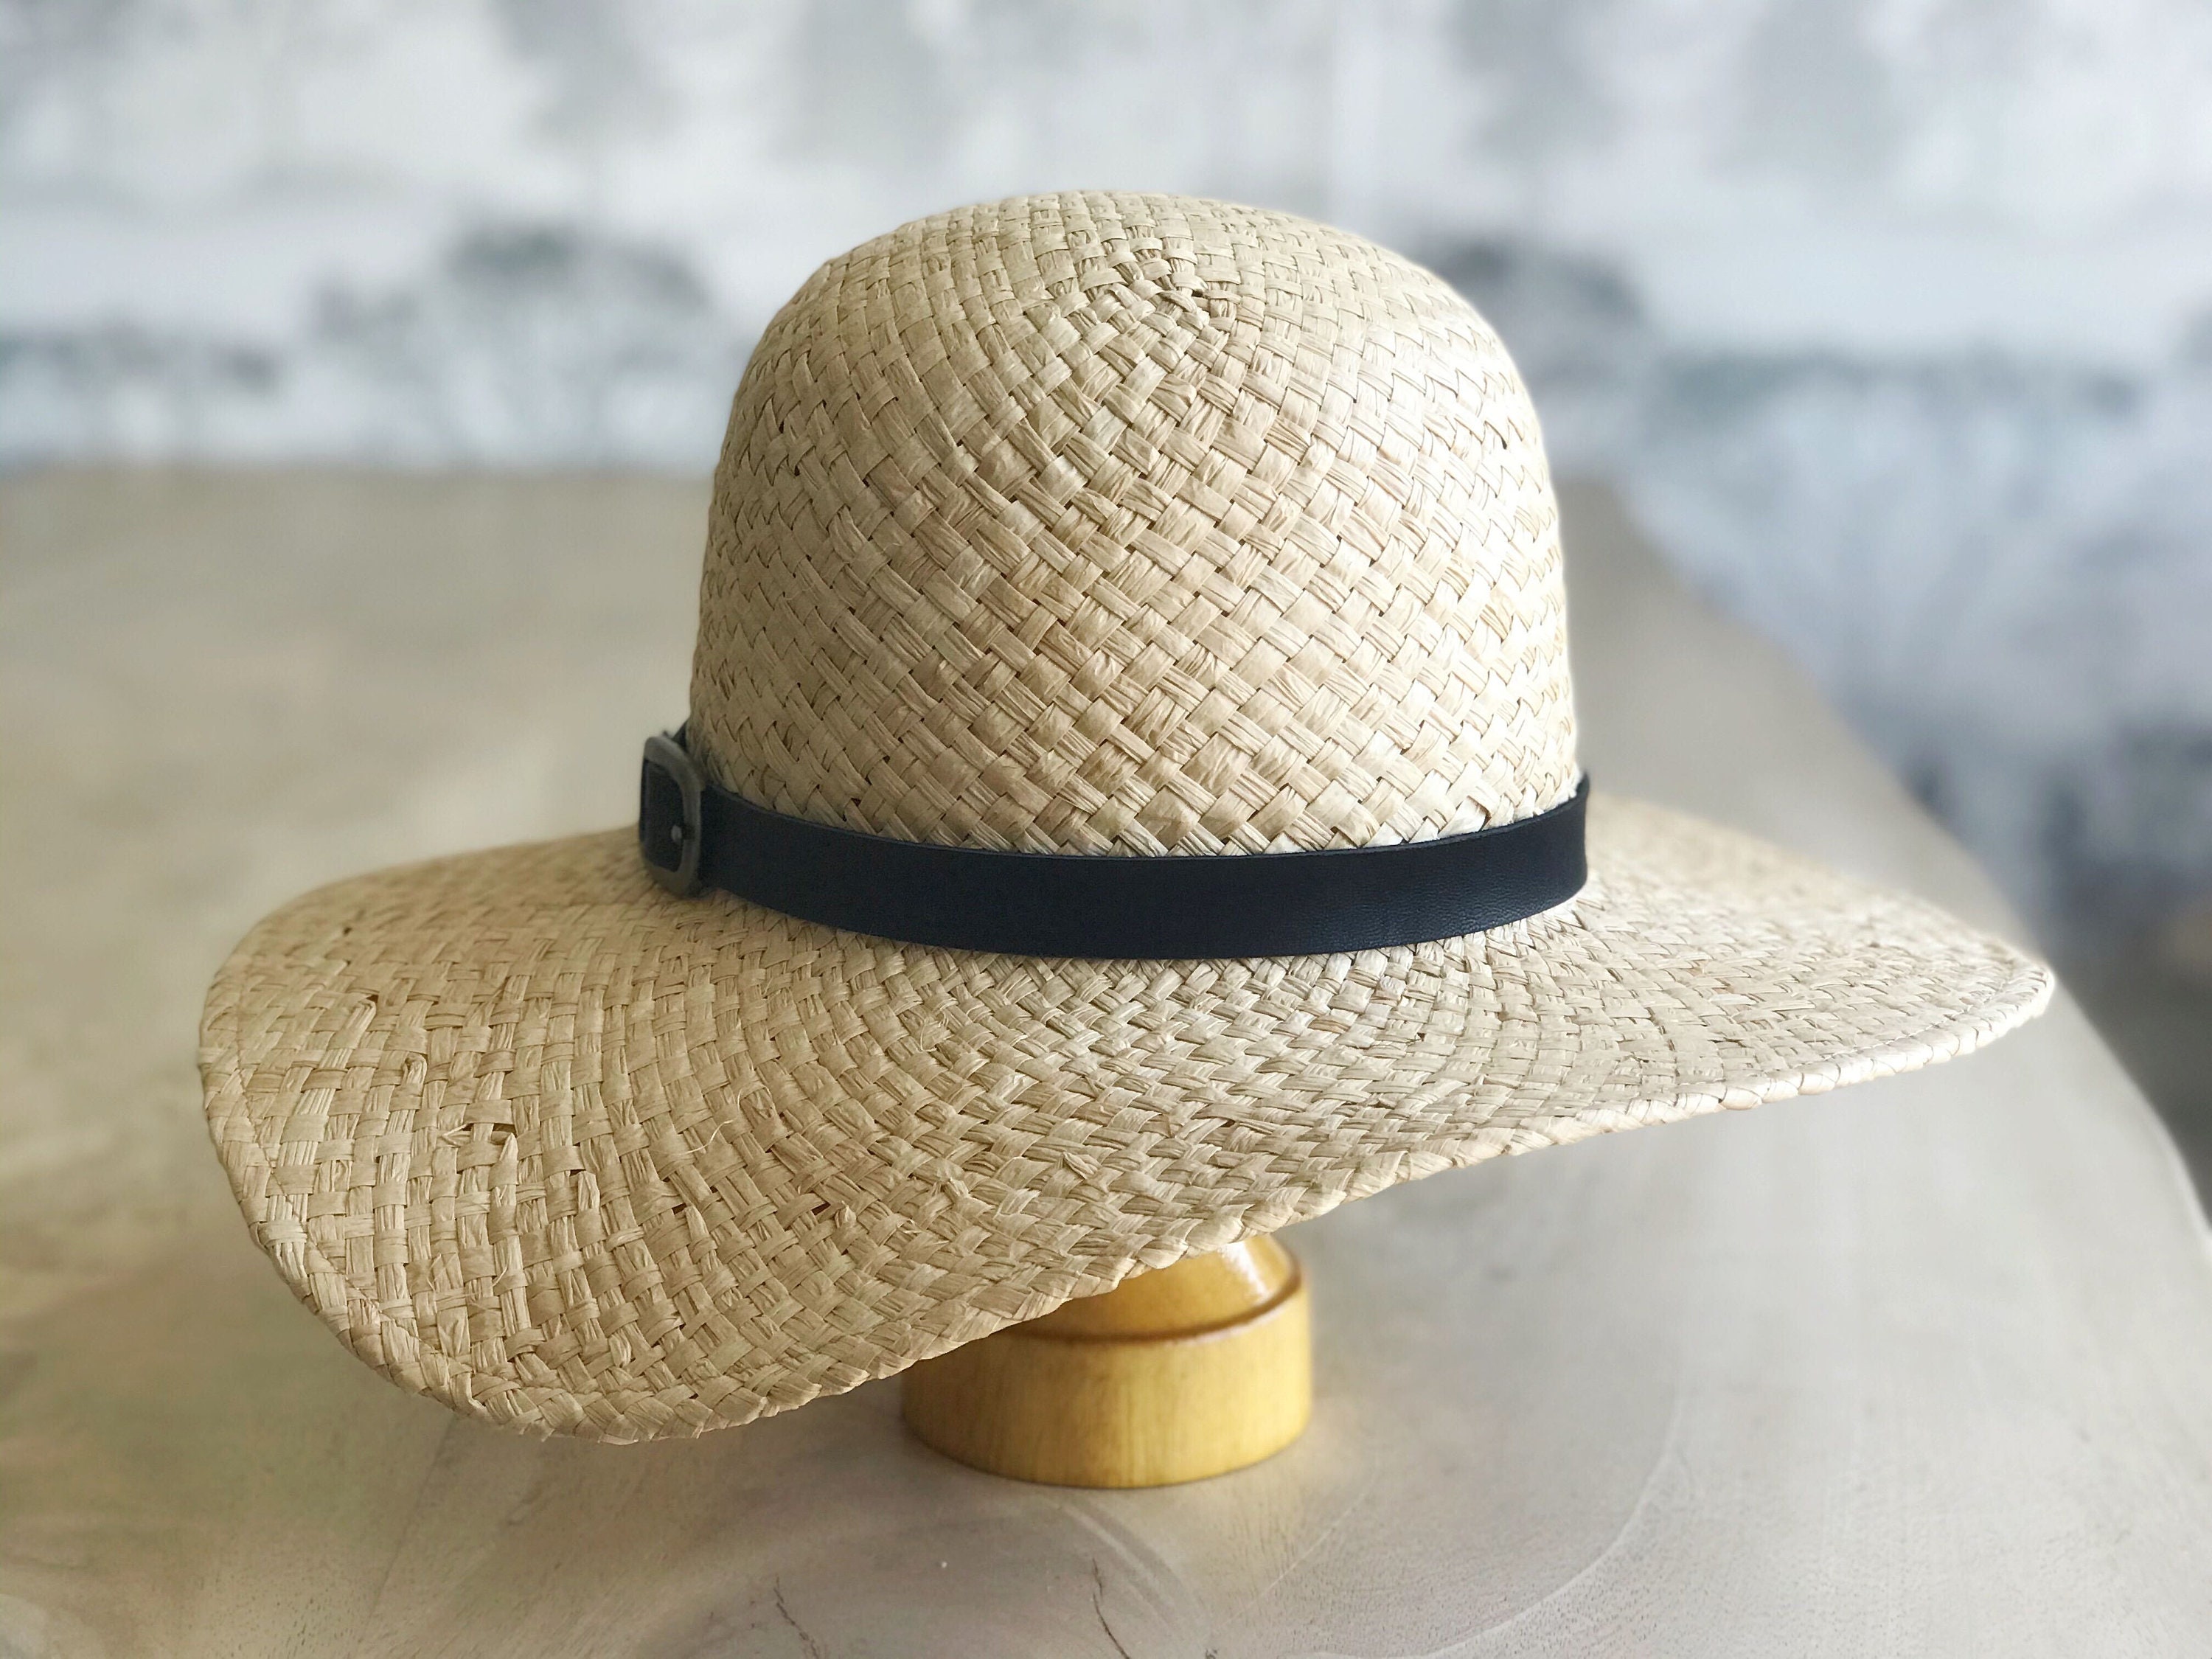 Parker: Round crown double raffia natural straw hat with | Etsy